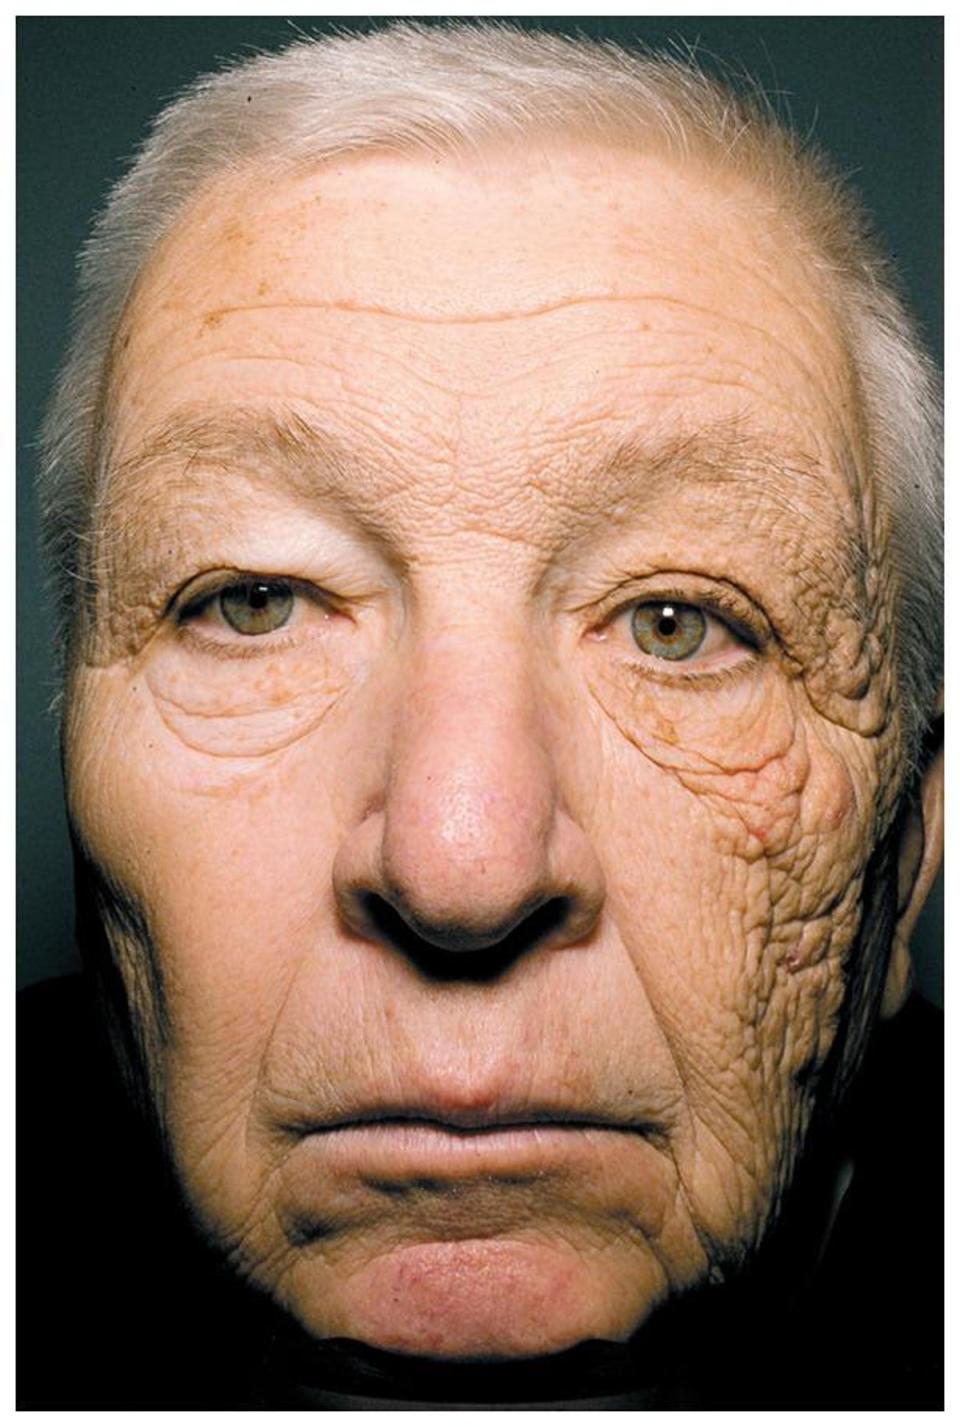 (New England Journal of Medicine)The jarring effects of UV radiation